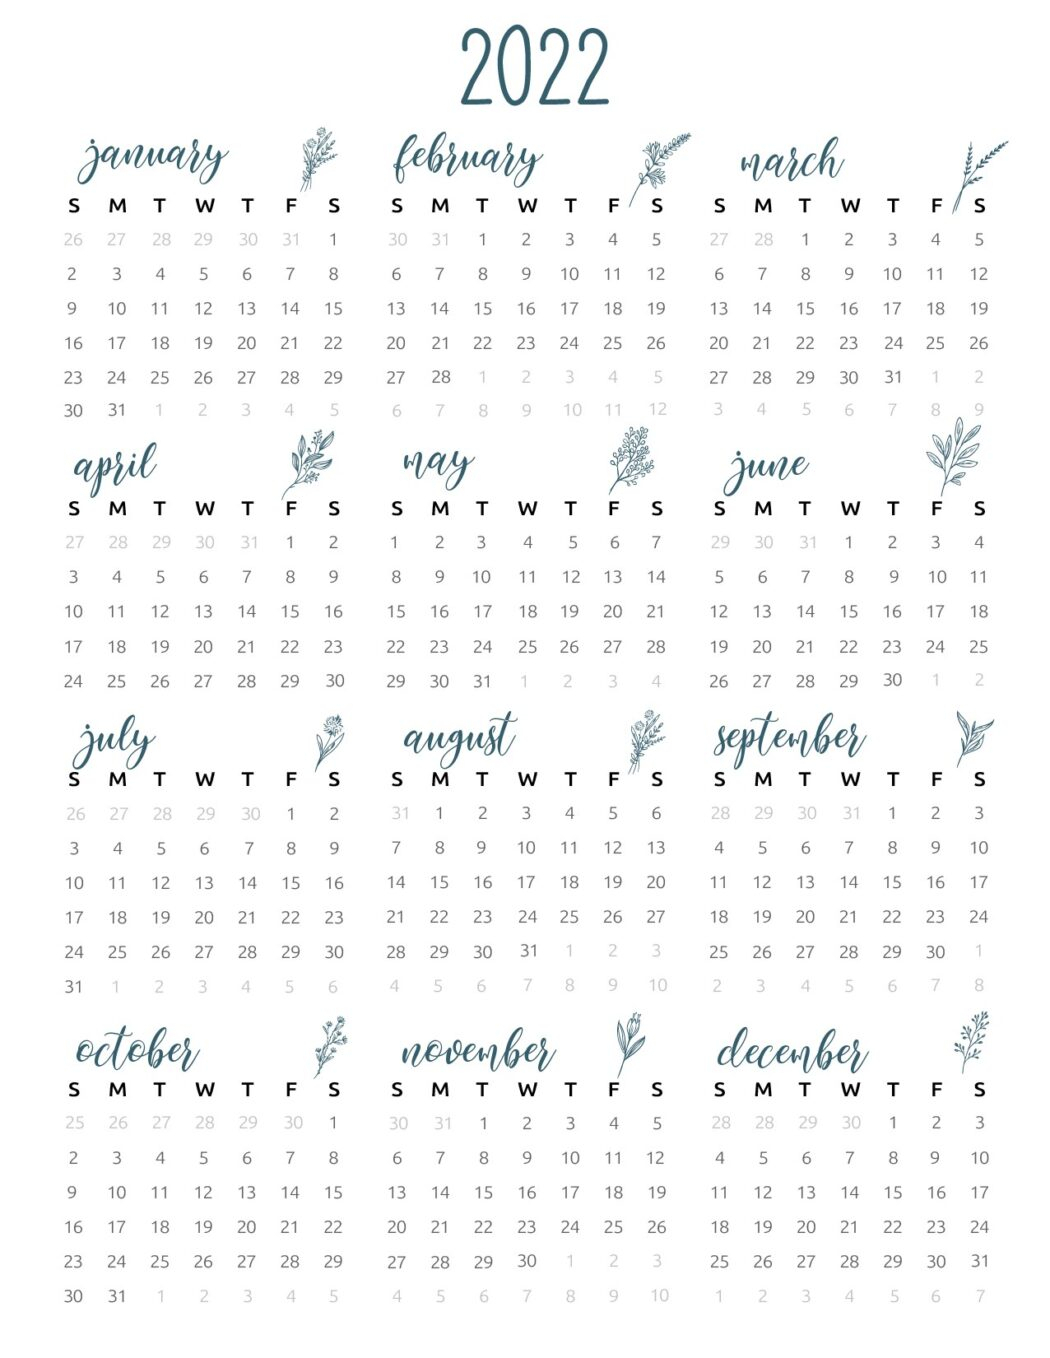 2022 Yearly Calendar Printable  World Of Printables with regard to Free Printable Fiscal Year 2022 Calendar